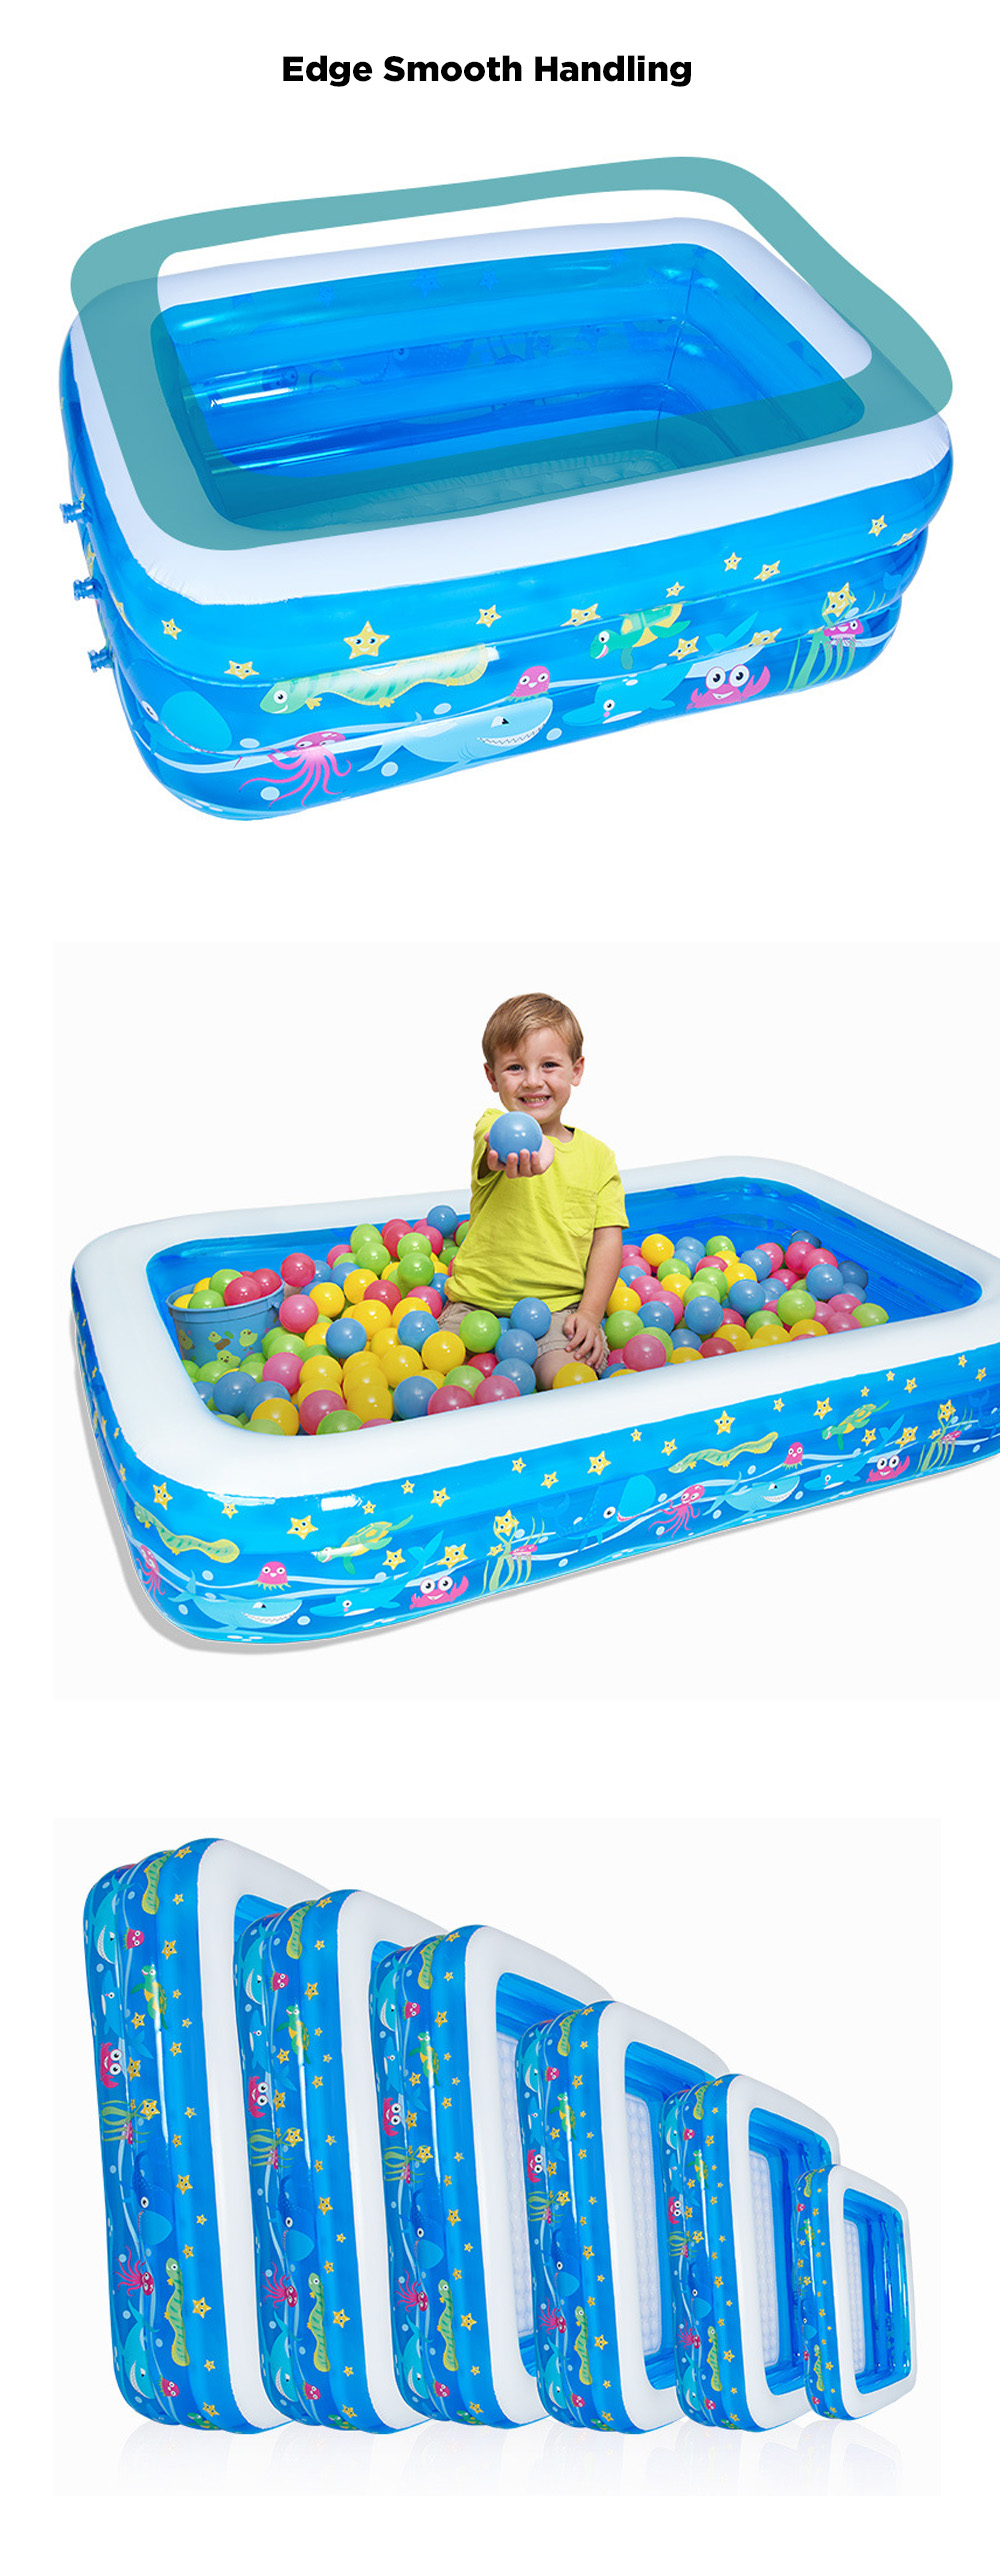 Inflatable-Swimming-Pool-Kids-Adult-Yard-Garden-Family-Party-Outdoor-Indoor-Playing-Inflatable-Batht-1674131-2